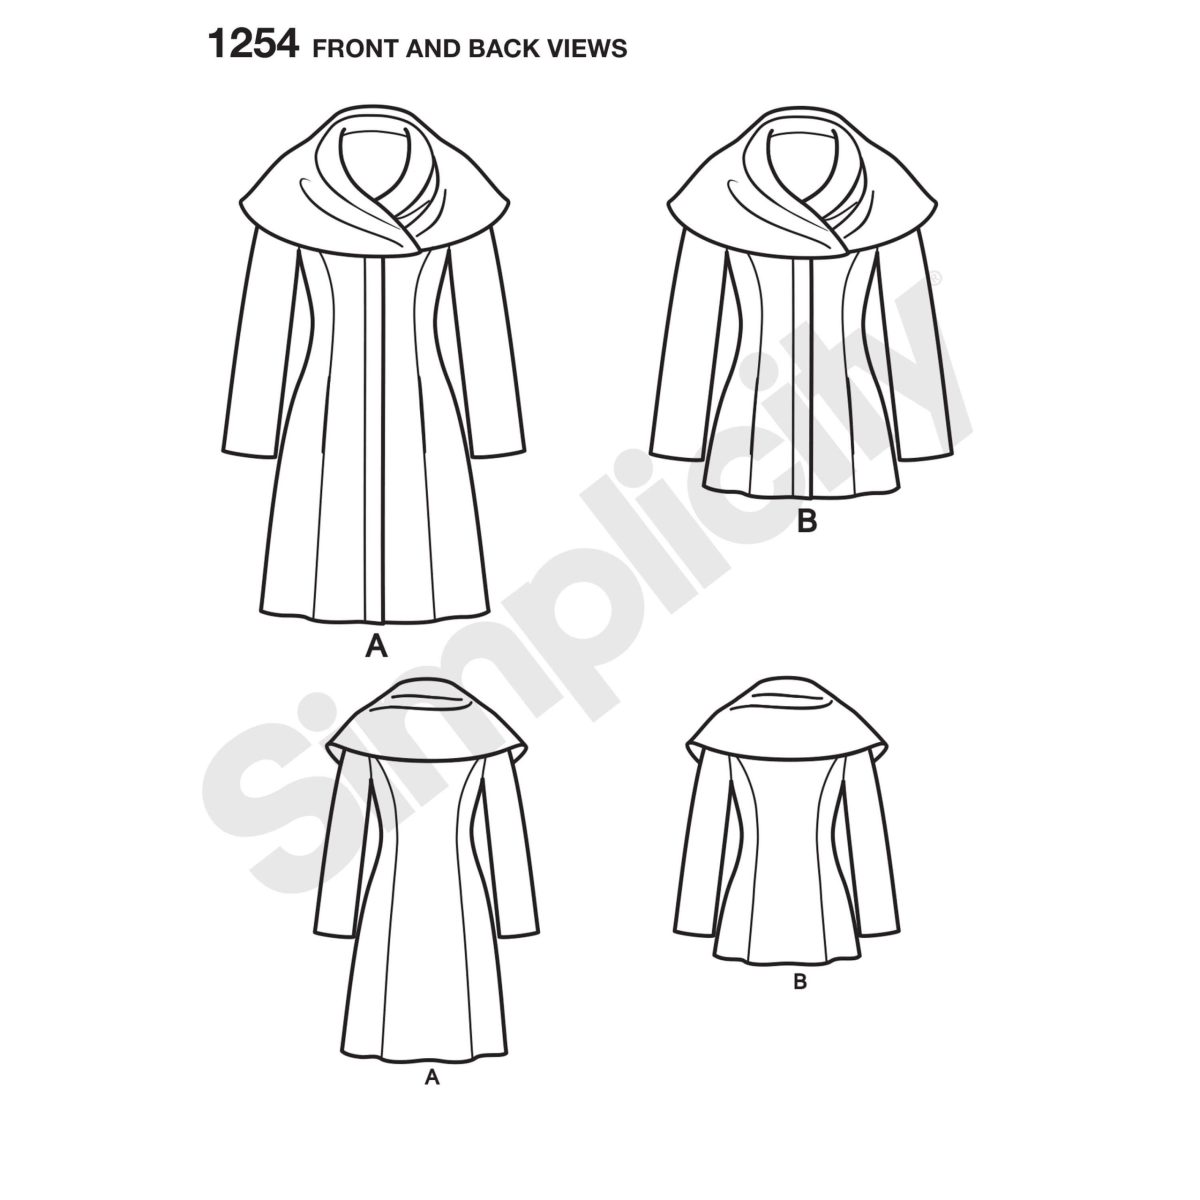 Simplicity Sewing Pattern 1254 Misses' Leanne Marshall Easy Lined Coat or Jacket